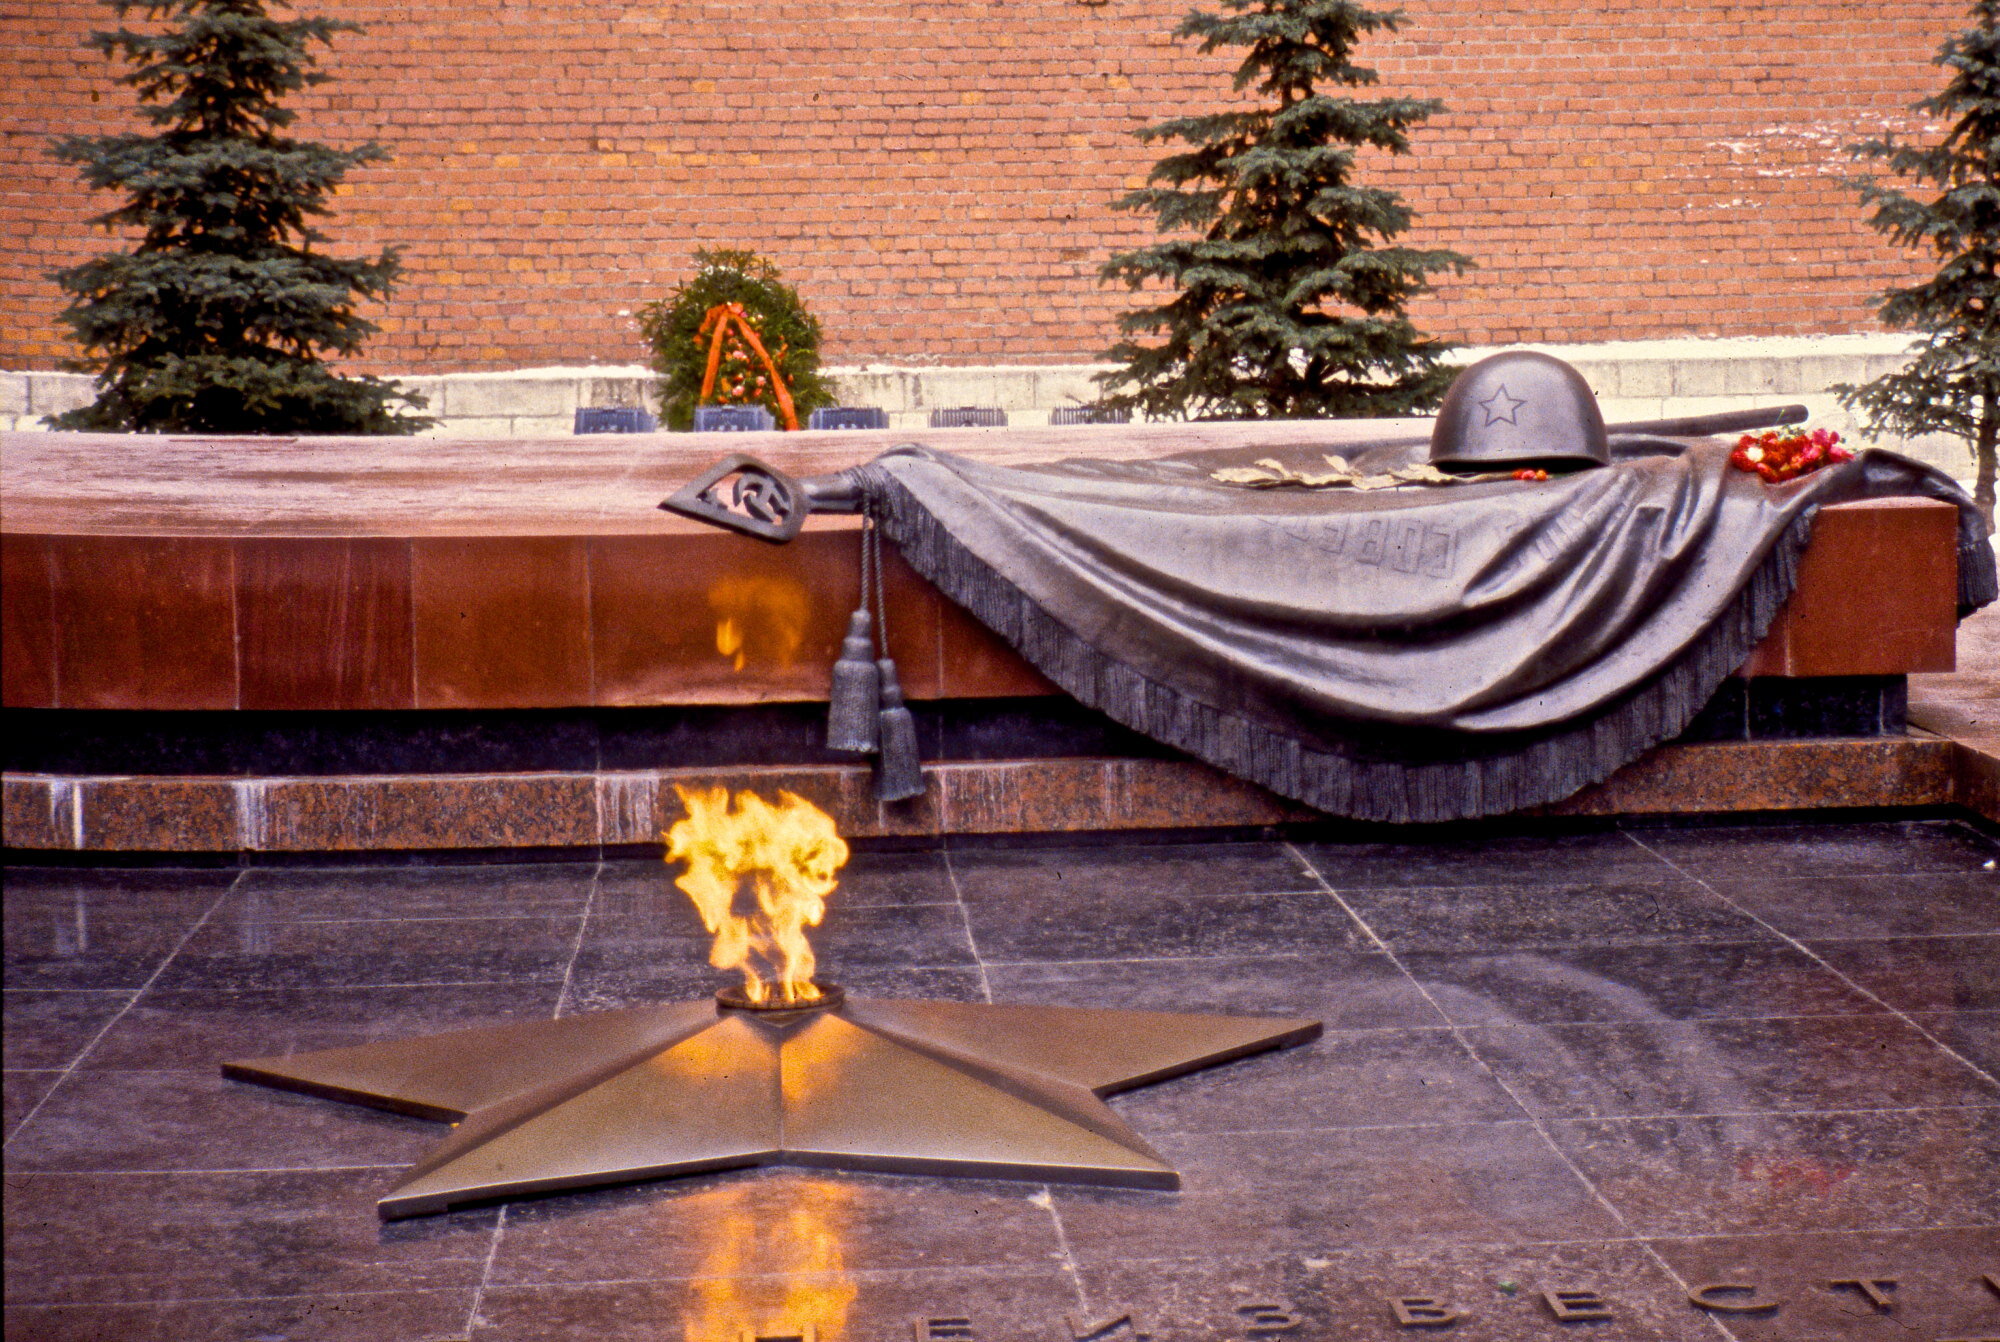 The Tomb of the Unknown Soldier. Moscow, Russia.